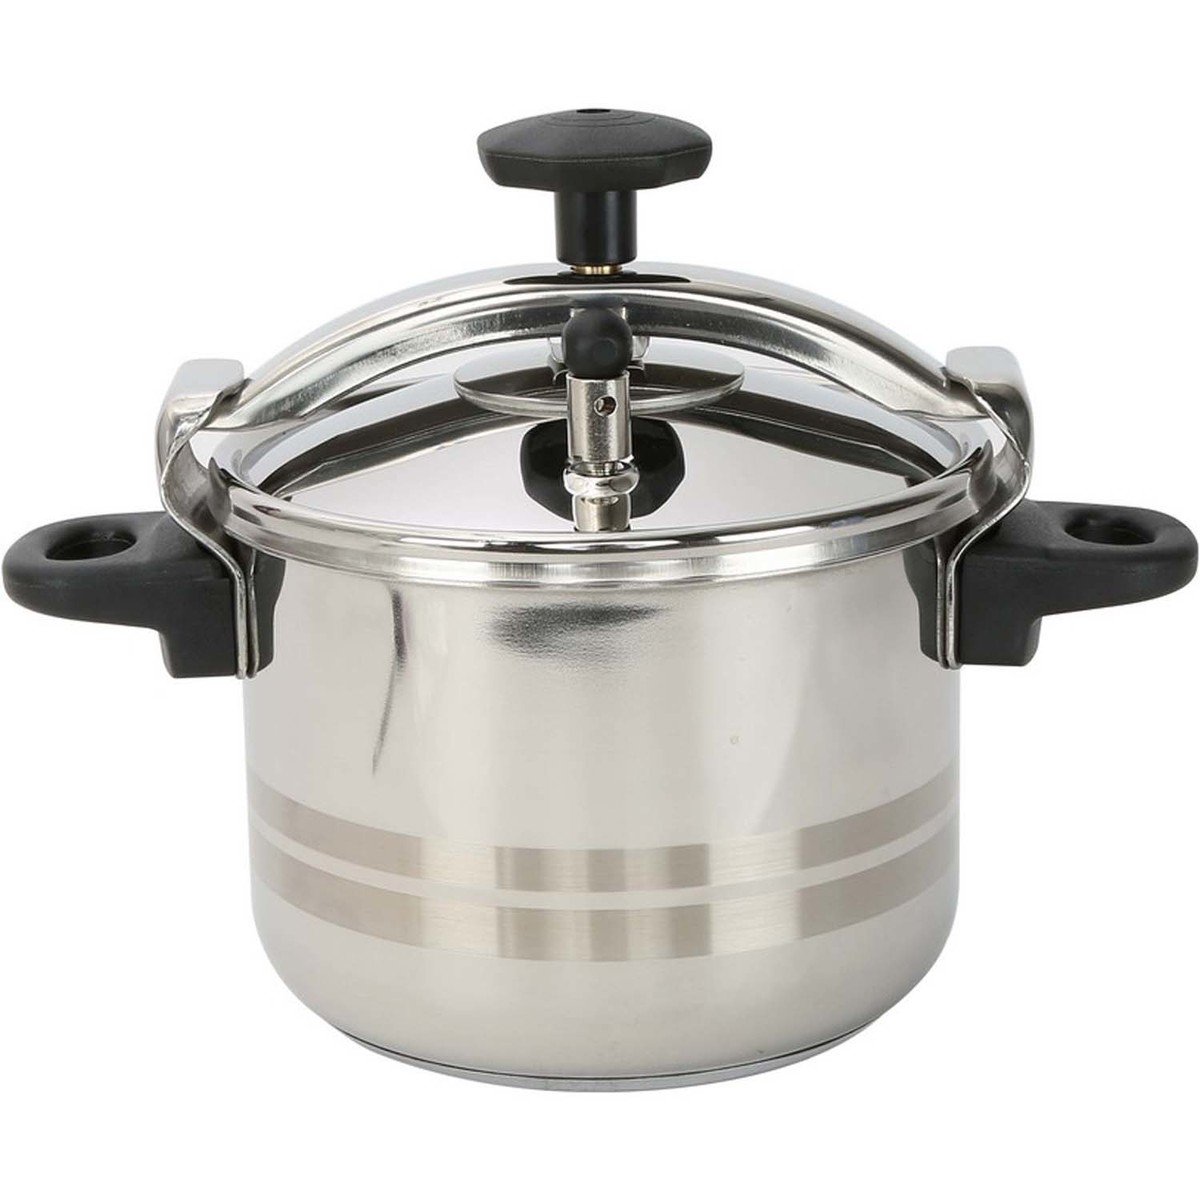 Evinox Stainless Steel Pressure Cooker Classic 12Ltr